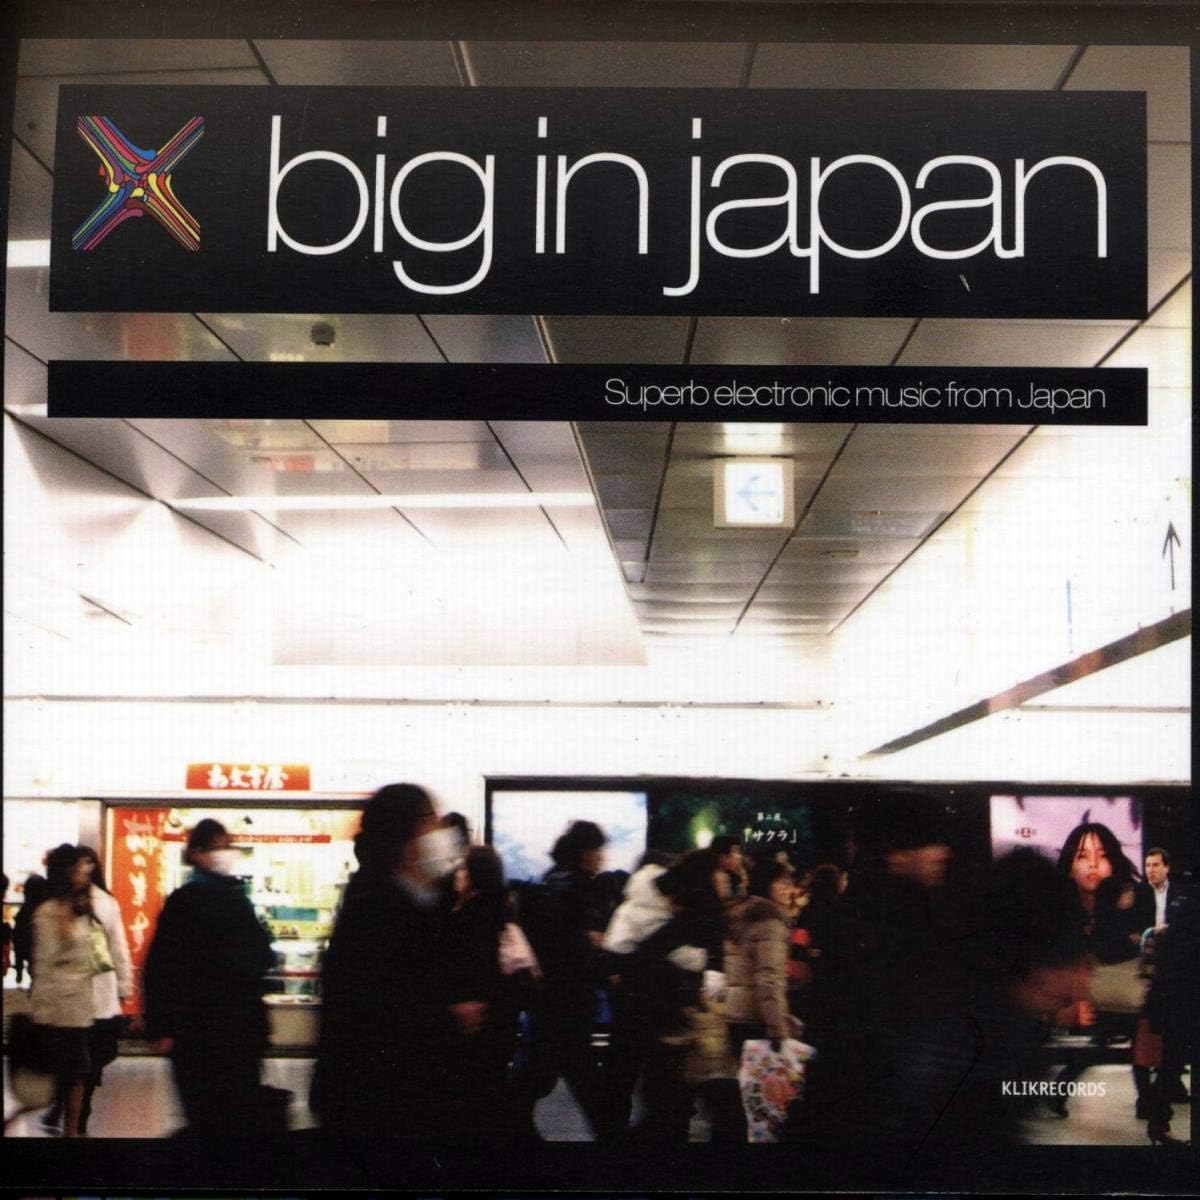 On 4 of April 2007 a brand new compilation project, titled Big In Japan will be released from Klik records. George Kyriakou and Hiroshi Watanabe make an imaginative trip to the Far East and present a unique project dedicated to the Japanese elctronic culture. Based to stories we heard up to now, Japanese artists are quite popular for their minimal techno sound while performing in clubs. In the particular case the myth falls down with the Japanese producers presenting in opposition a thematic history where their internal -sentimental world elects itself, approaching to a large extent the Mediterranean culture. Undoubtfully Big In Japan constitutes a project where the Japanese artists attribute their biggest respect in a country that they admire so much for its history, its beauty, and of course its crowd based always on amazing stories they heard from an established Greek Japanese hero, Hiroshi Watanabe. A unique listening experience, an endless trip feat ten eclectic productions from Hiroshi Watanabe, Seiichiro Tanaka, Slow Didi, Takayuki Higo aka Helix, Anemos, Dj sodeyama, Japanese Synchro System, Satoshi Fumi, Jun Yamabe & Anemos. In total, ten unique musical soundscapes flirting between atmospheric deep house, mellow beats and techy electronica ready to melt your heart The Release party of Big In Japan will be held on the 1st of June at Zapeio, Athens with the Japanese artists presenting live and dj sets